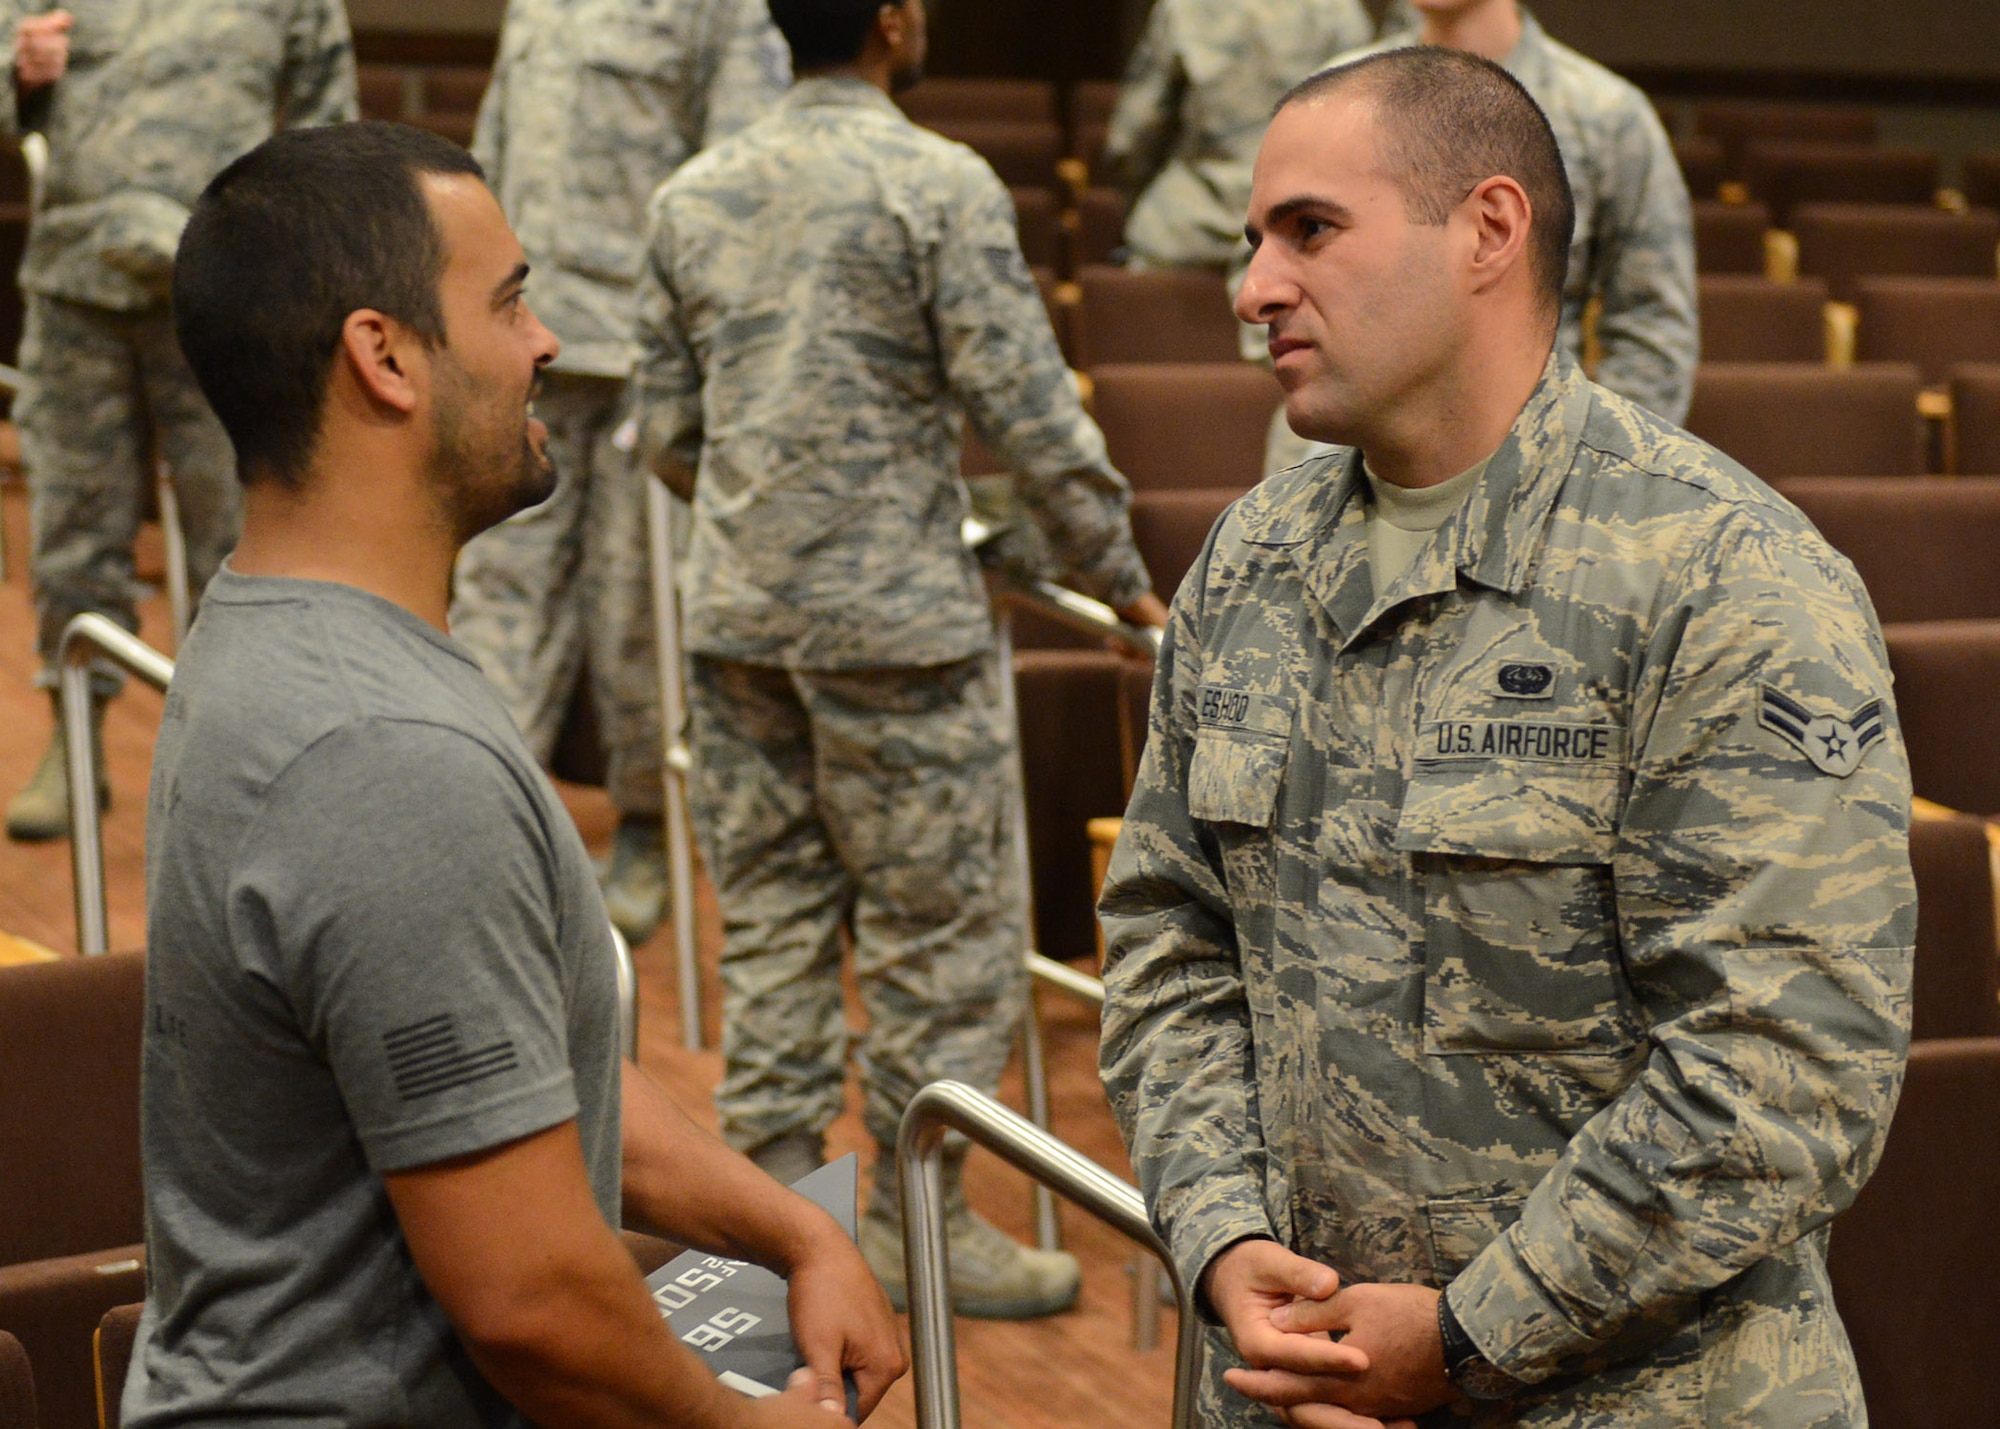 Former Navy SEAL Chad Williams, talks with Airman 1st Class Makarios Eshoo, 56th Communications Squadron network infrastructure technician, after his speech June 7, 2017, at Luke Air Force Base, Ariz. Williams had the opportunity to speak with Airmen about his time as a Navy SEAL and held a question and answer session afterward. (U.S. Air Force photo by Senior Airman James Hensley)